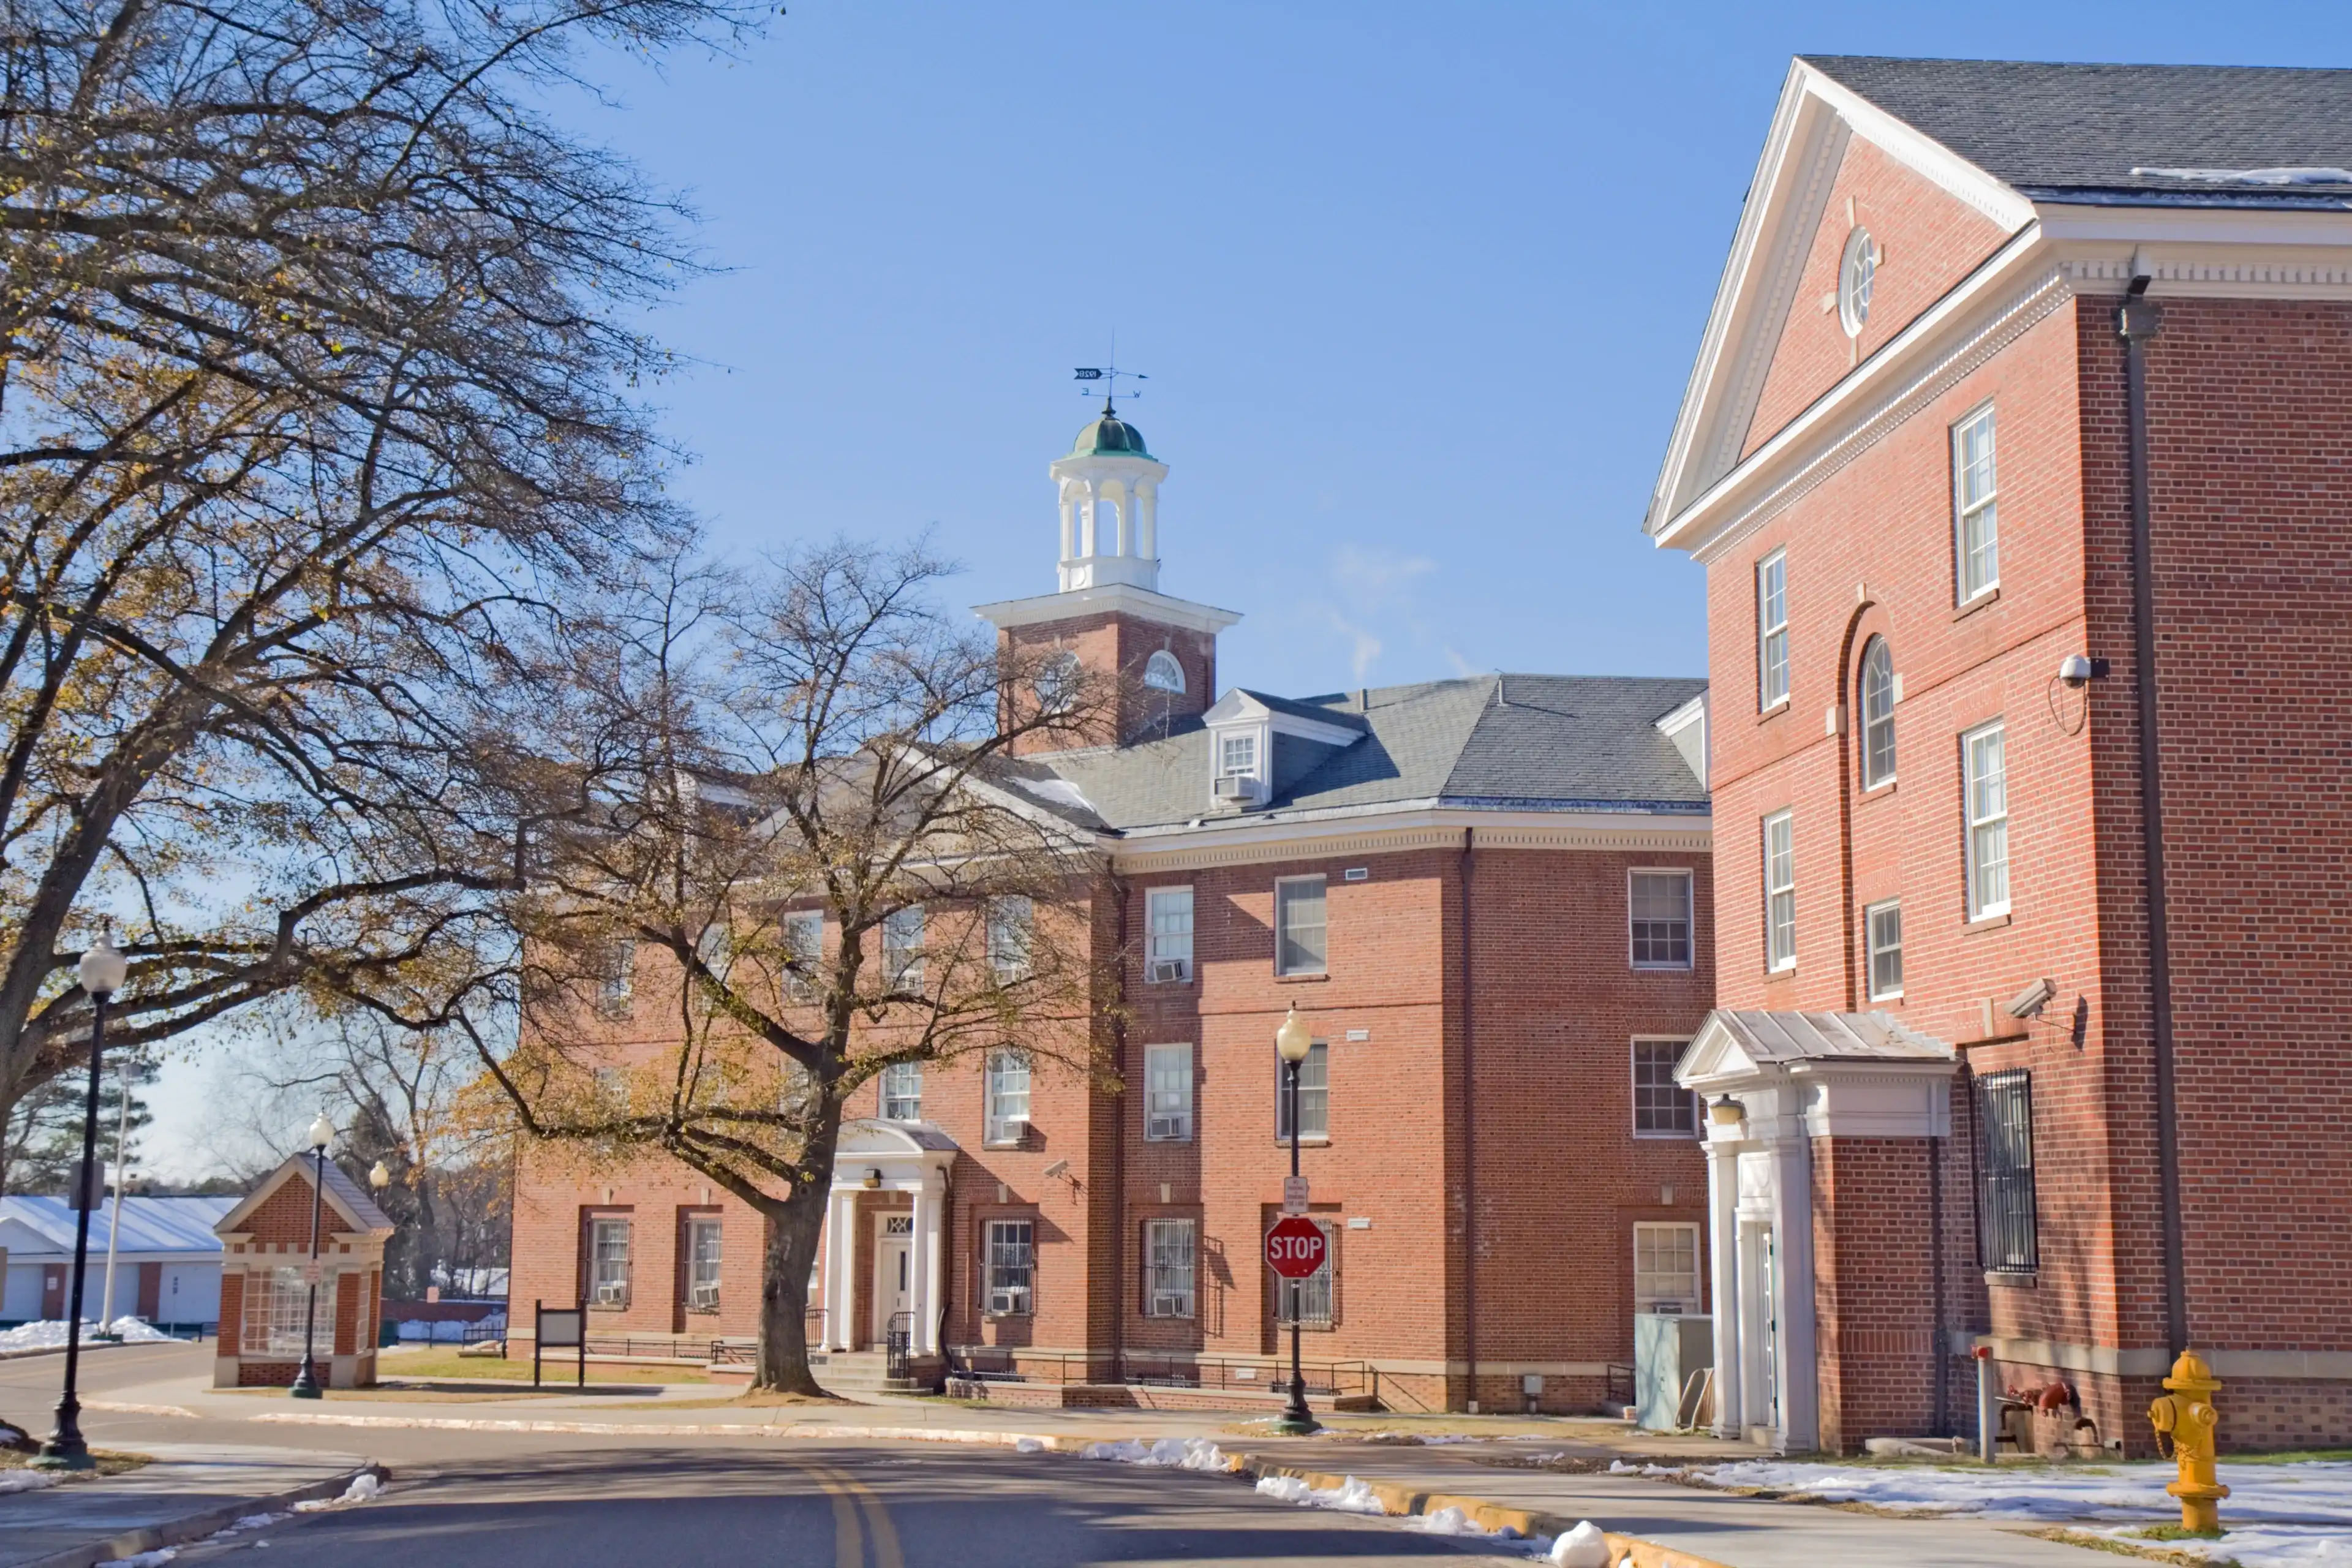 Byrd and Eggleston Halls on the campus of Virginia State University near Petersburg, Virginia, one of the public, Historically Black Colleges and Universities with blue sky and white snow in winter